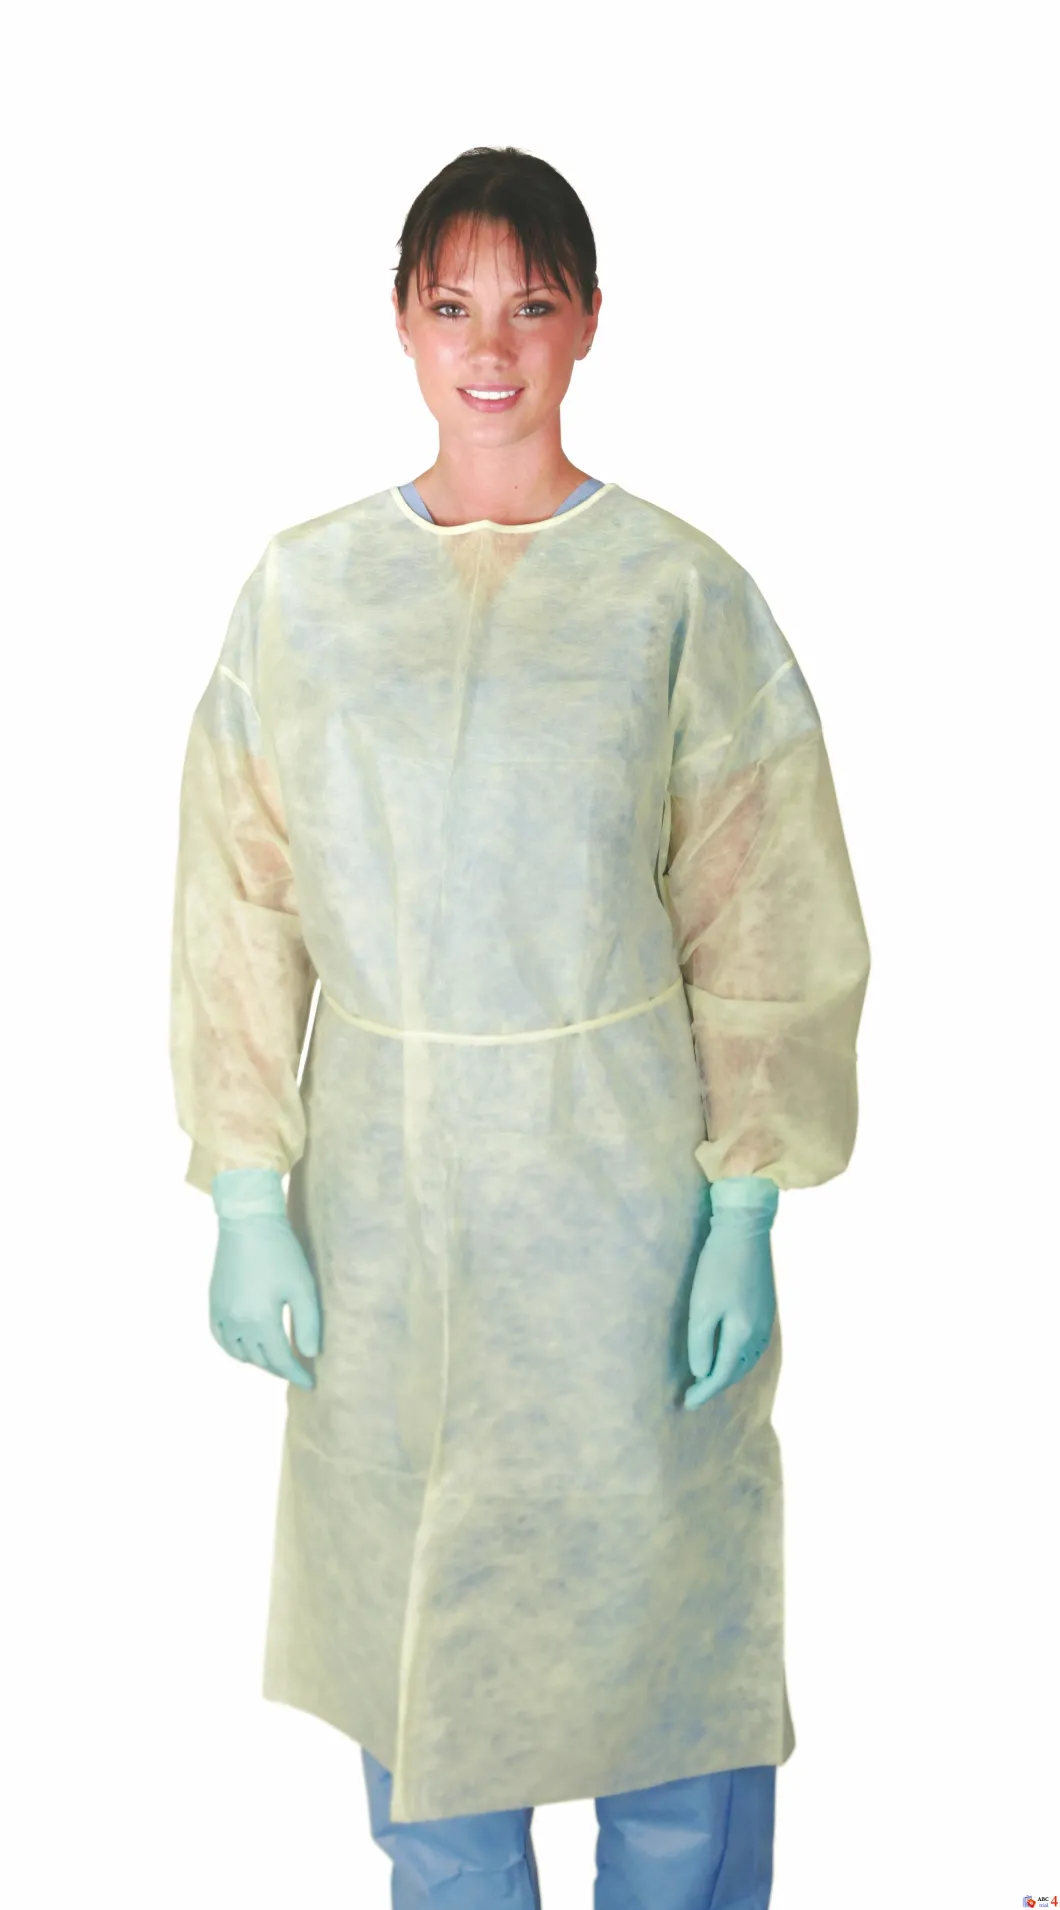 Ce FDA Wholesale Anti Virus Protective Full Body Suit Safety Disposable Medical Surgical PPE/SMS Isolation Gowns